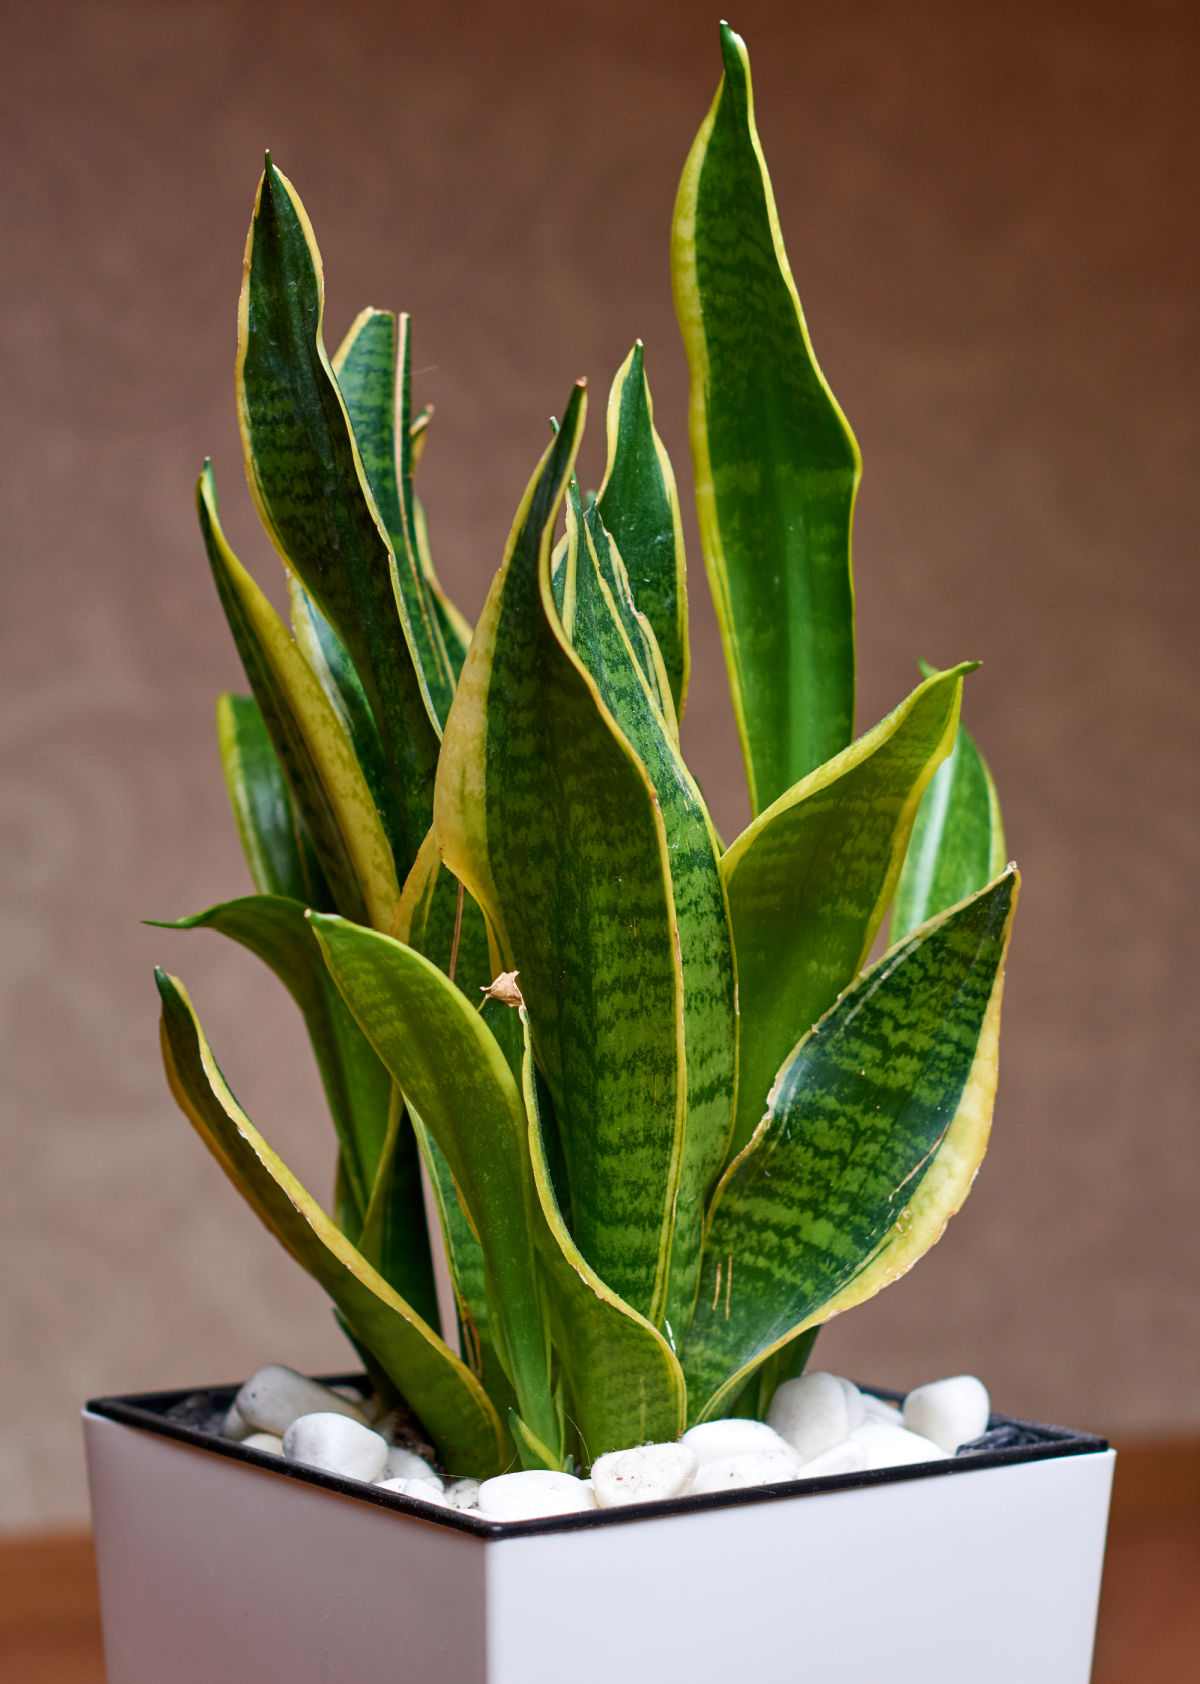 Snake plant in a white pot with decorative rocks.